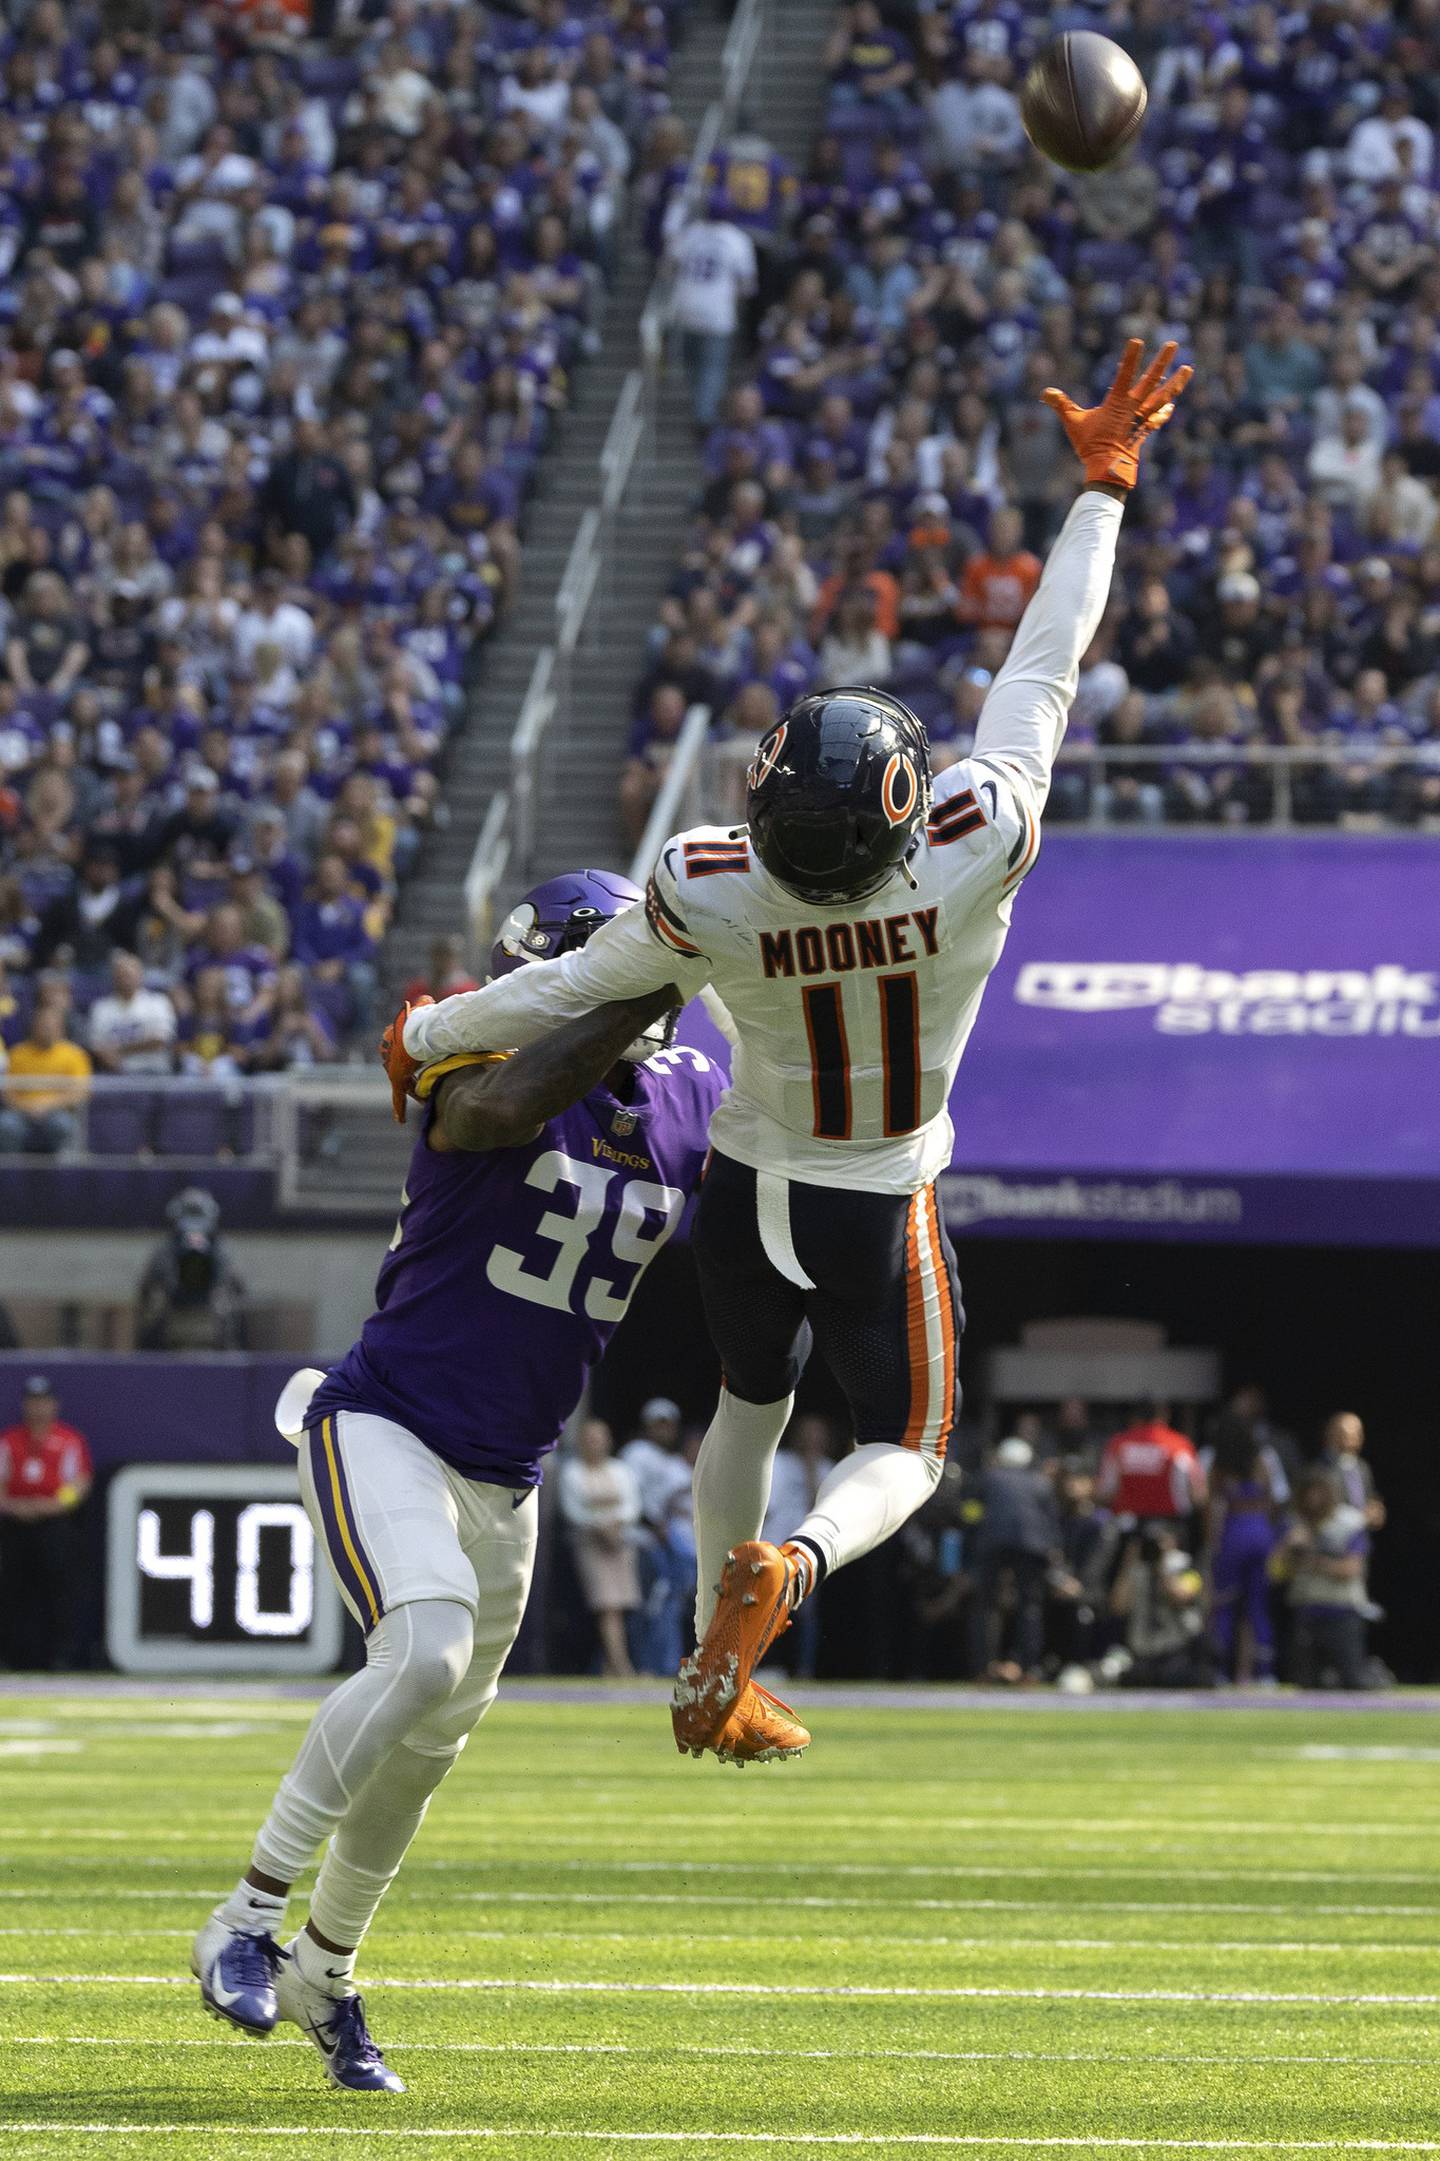 Bears wide receiver Darnell Mooney makes a one-handed catch on top of Vikings cornerback Chandon Sullivan during the second quarter at U.S. Bank Stadium on Oct. 9, 2022.